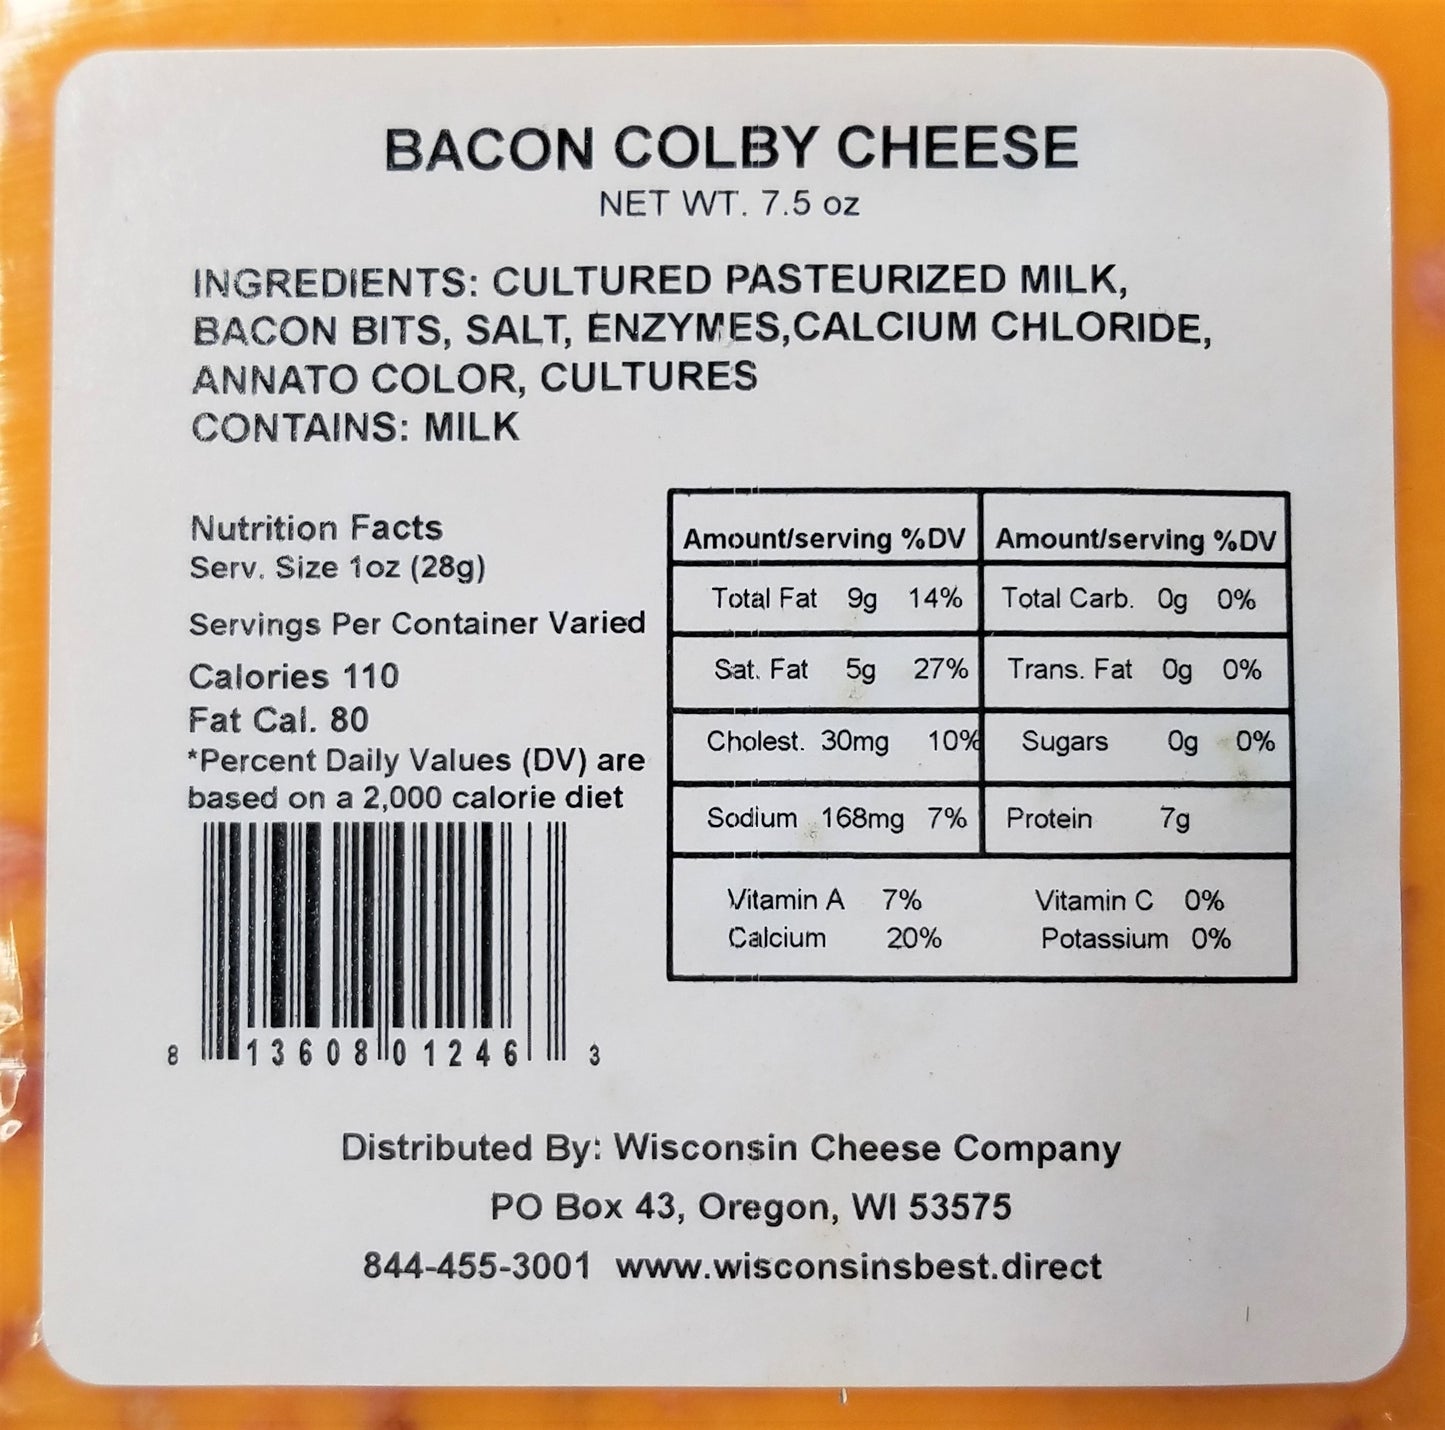 Wisconsin Cheese Bacon Colby Cheese Blocks, 7 oz. Per Block, A Great Cheese and Cracker Snack, Cheese Gift Idea